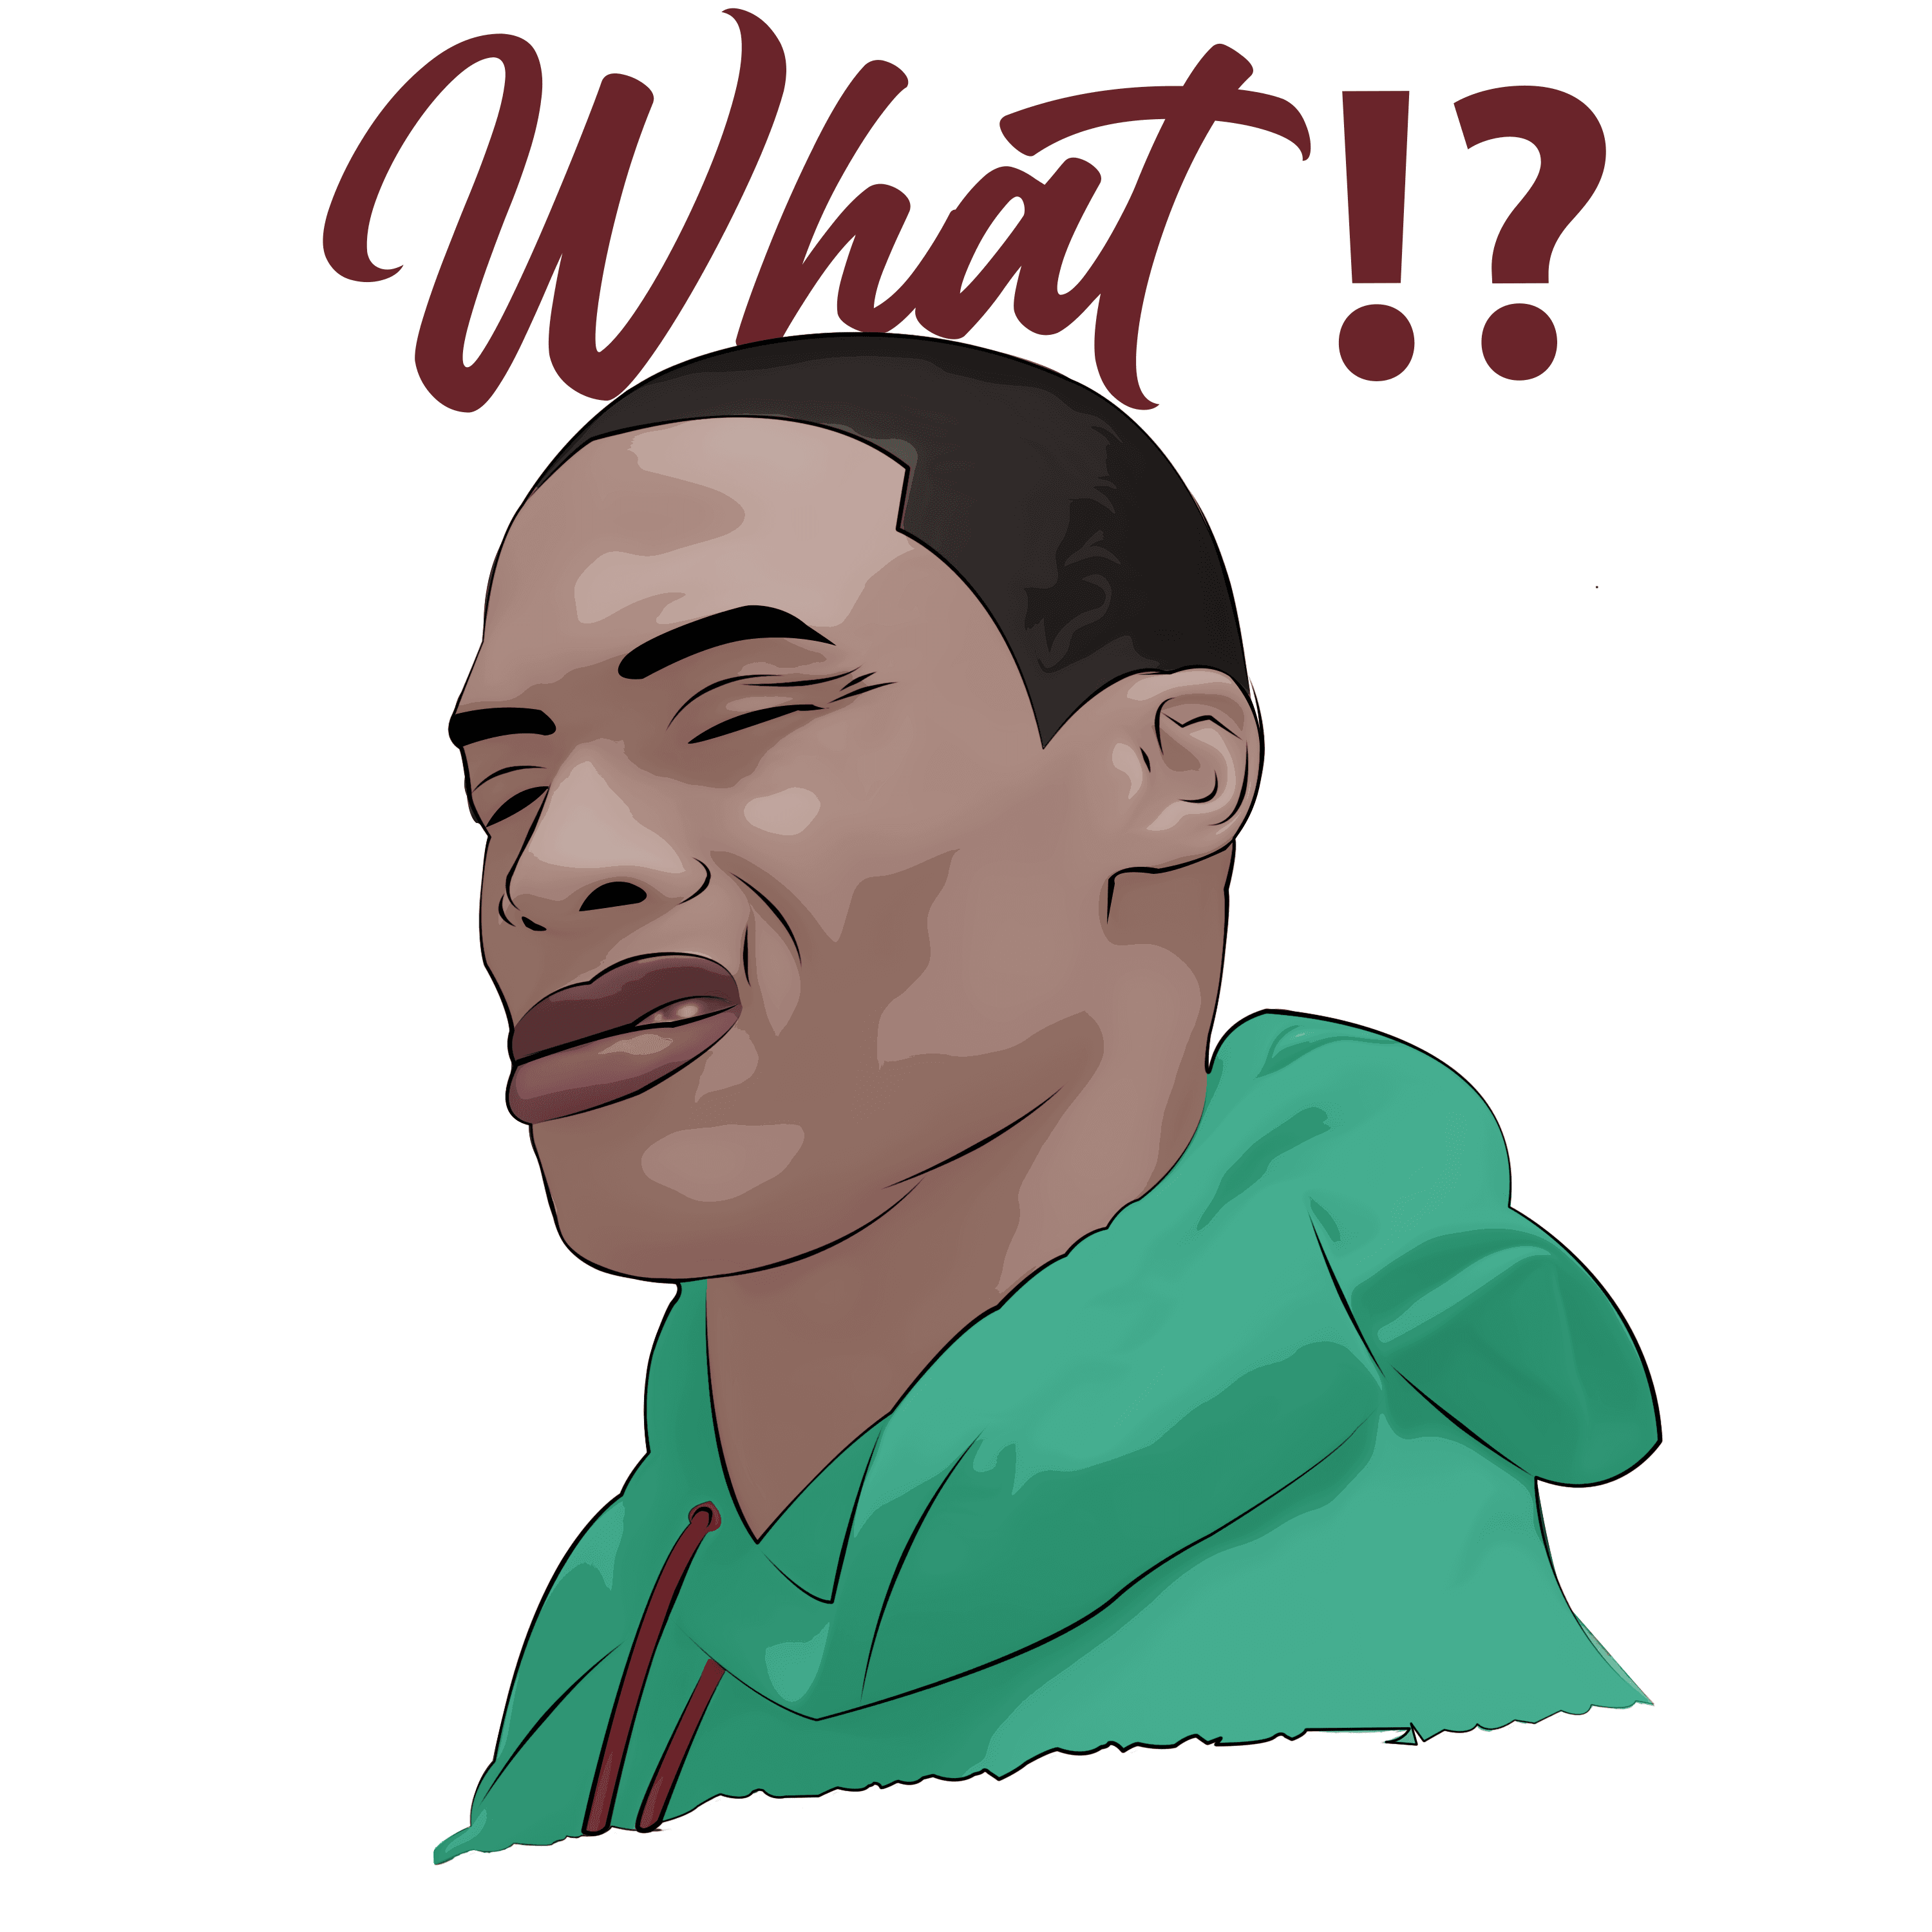 Russell - What!? (New Art Edition)